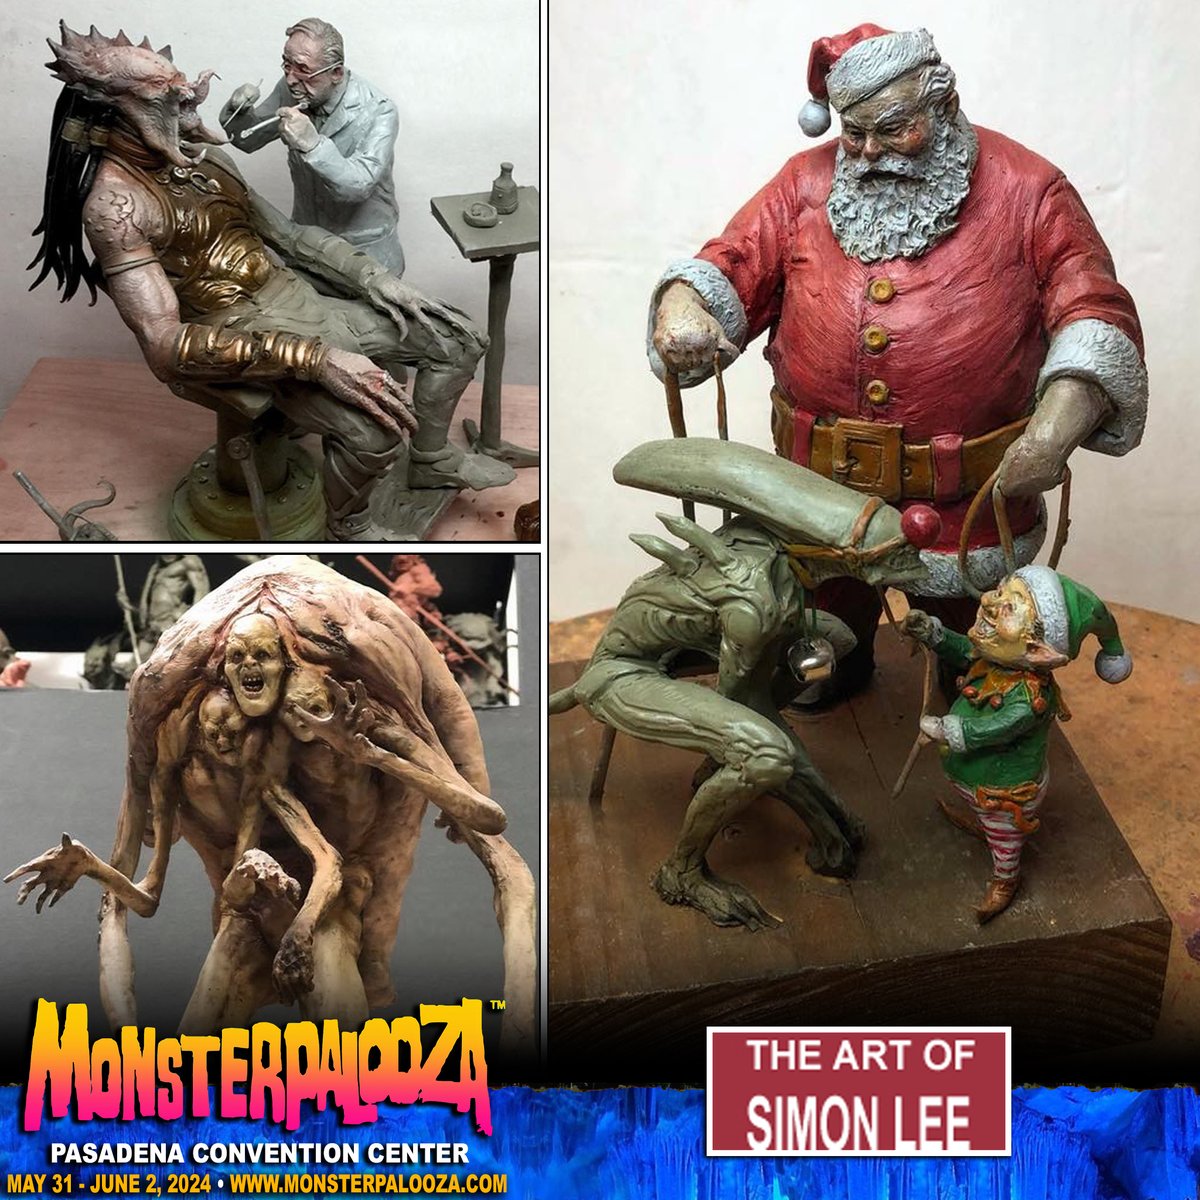 #Artist @SpiderzeroSimon is a #ConceptDesigner & #sculptor known for his work on such projects as #PacificRim, #TheStrain, #Maleficent & many more! Meet SIMON LEE/SPIDER ZERO at #Monsterpalooza May 31 - June 2! 

Tickets are on sale now! Click here ➨ eventbrite.com/e/monsterpaloo…